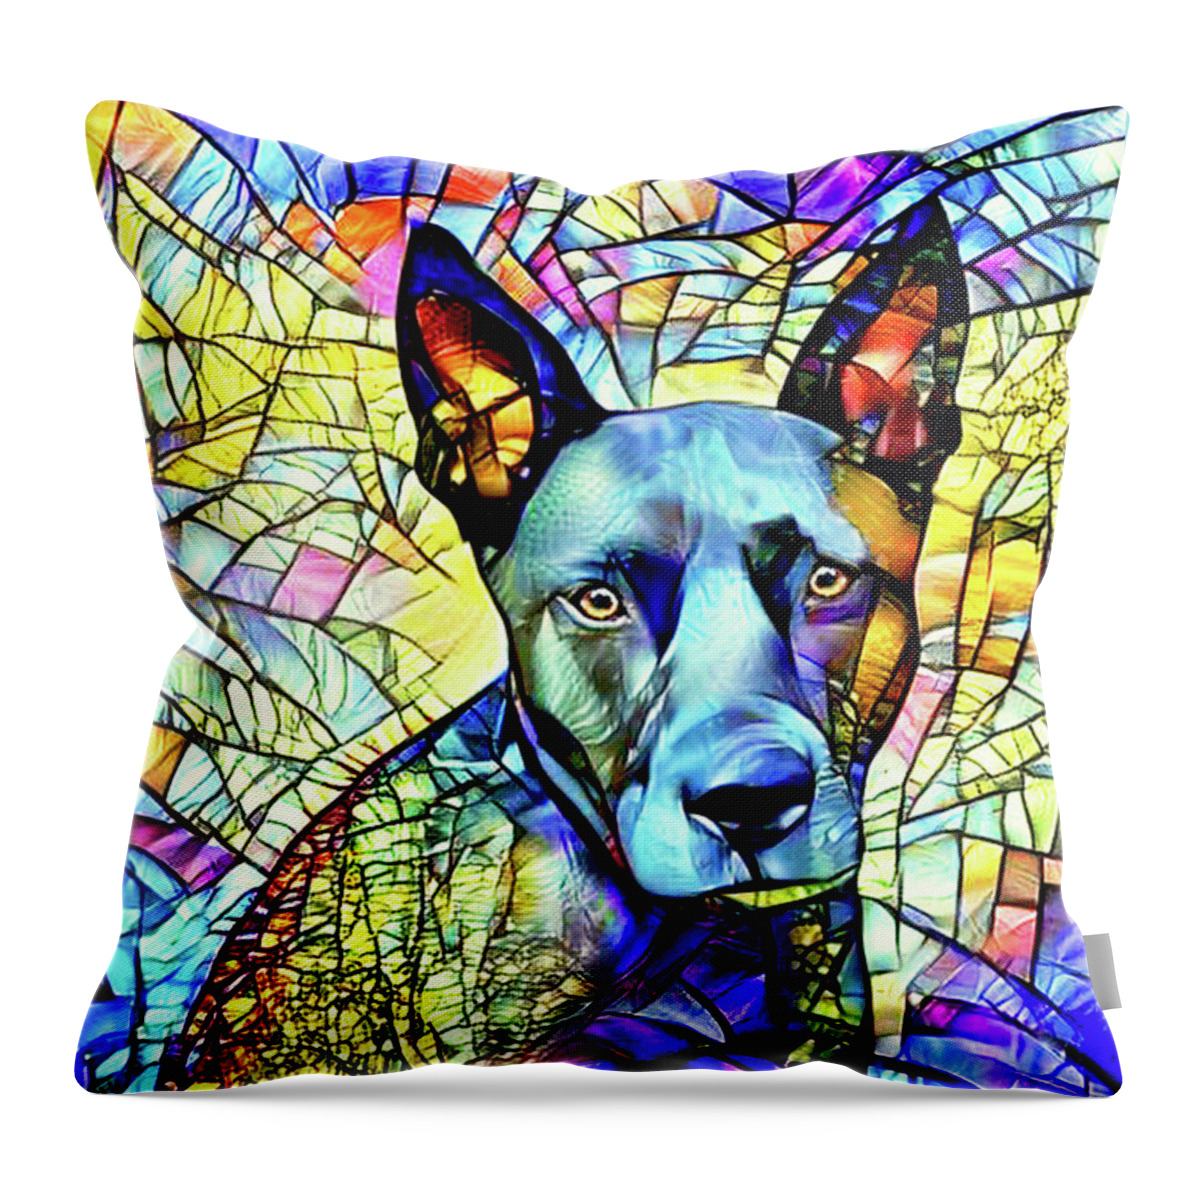 Belgian Malinois Throw Pillow featuring the digital art Sweet Lucy the Belgian Malinois by Peggy Collins